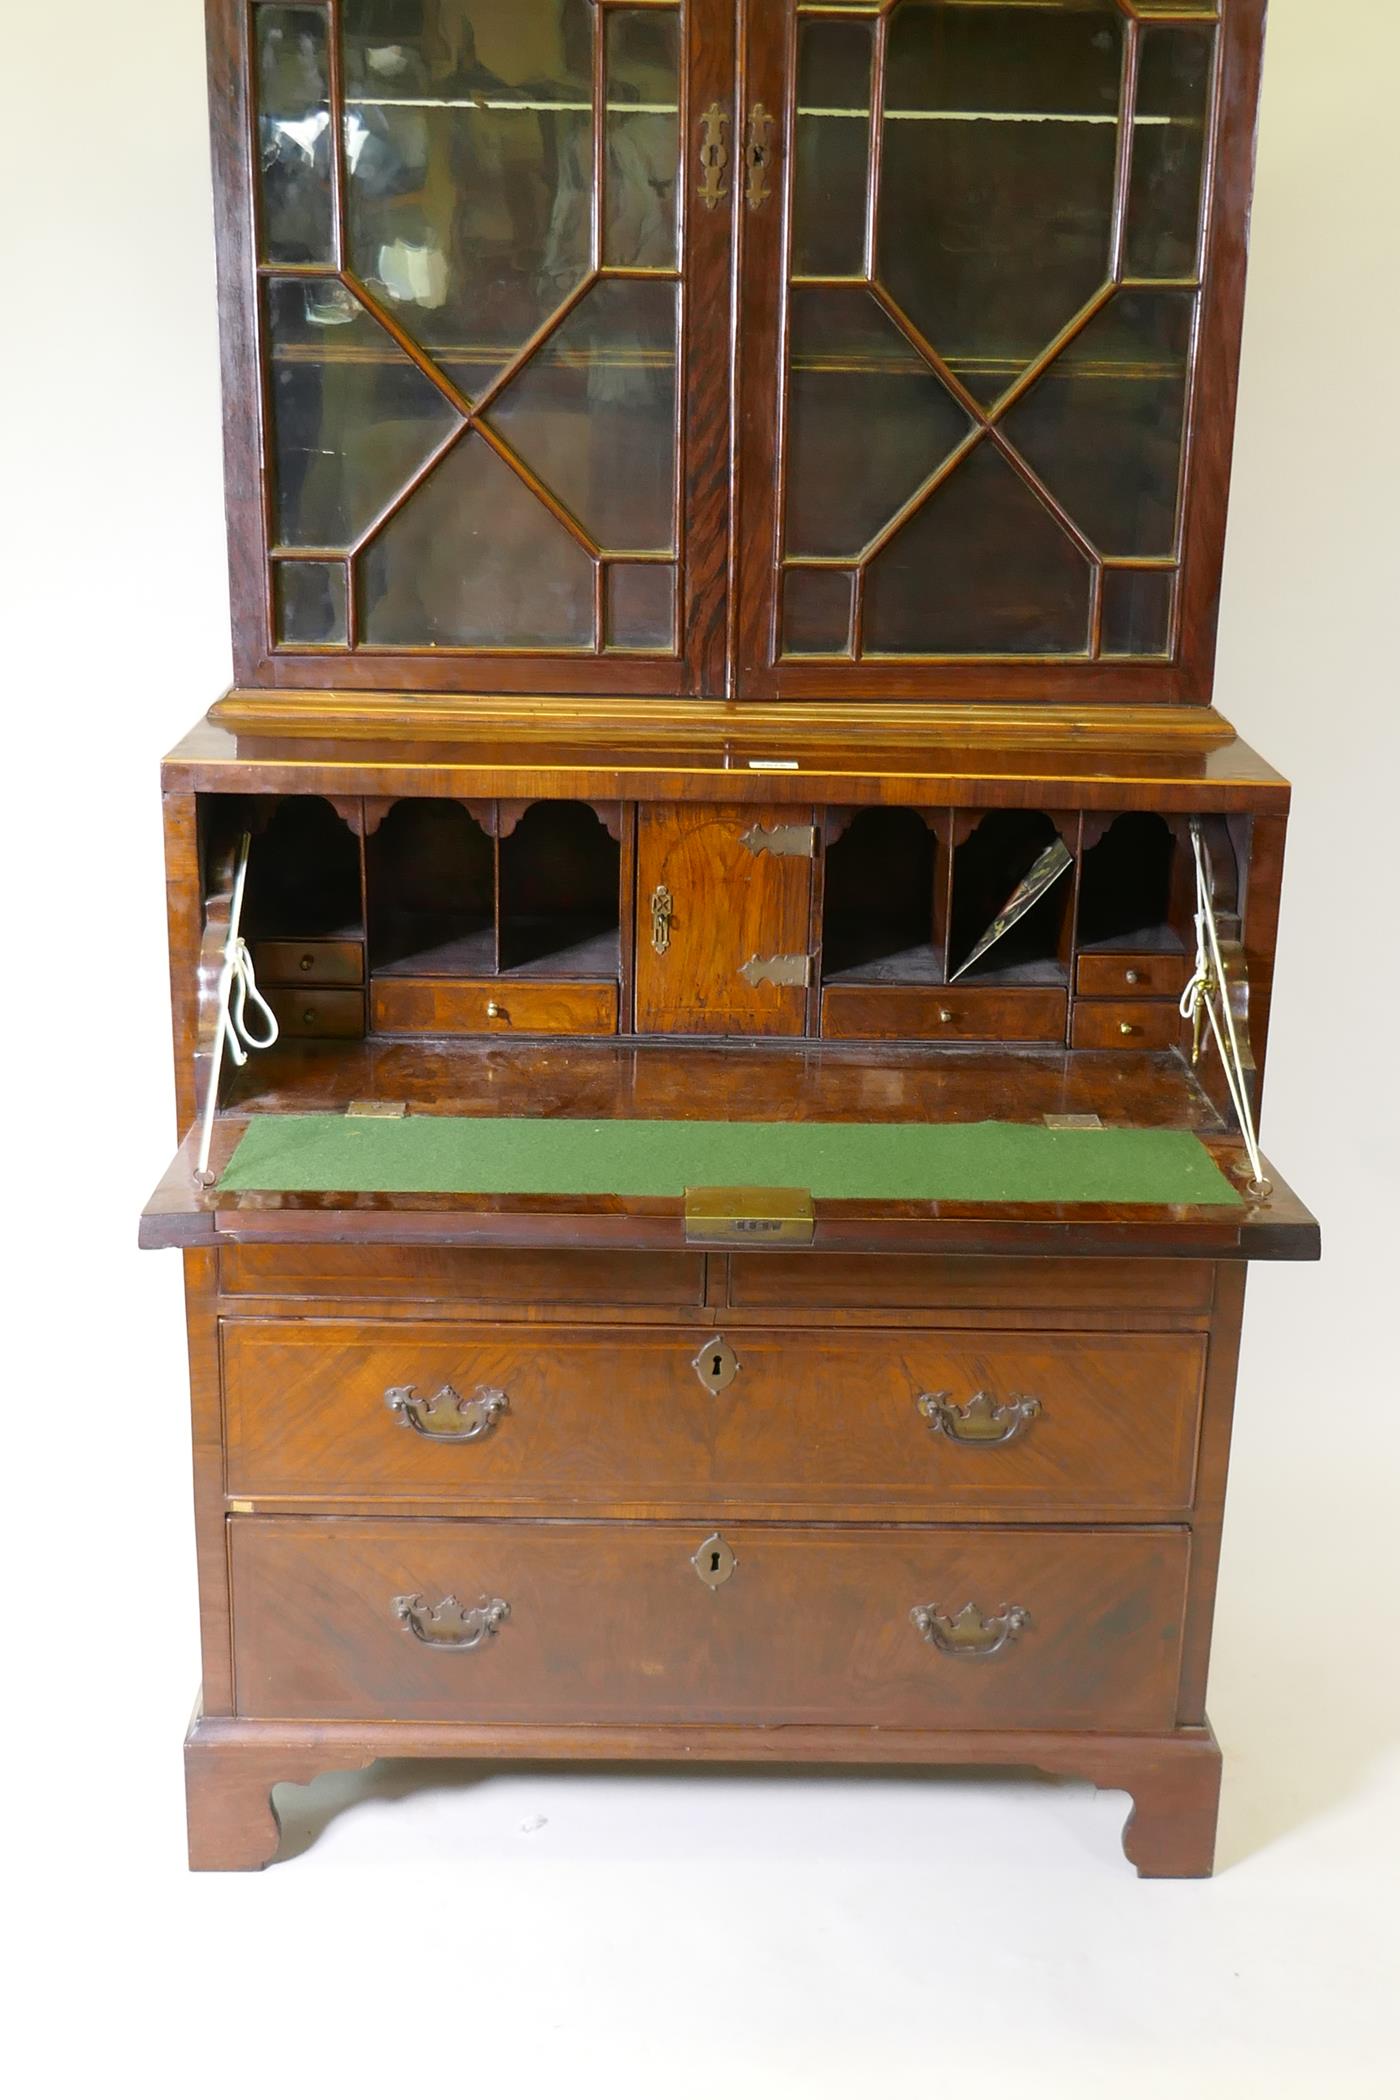 A C19th figured walnut secretaire bookcase, the astragal glazed upper section with adjustable - Image 3 of 7